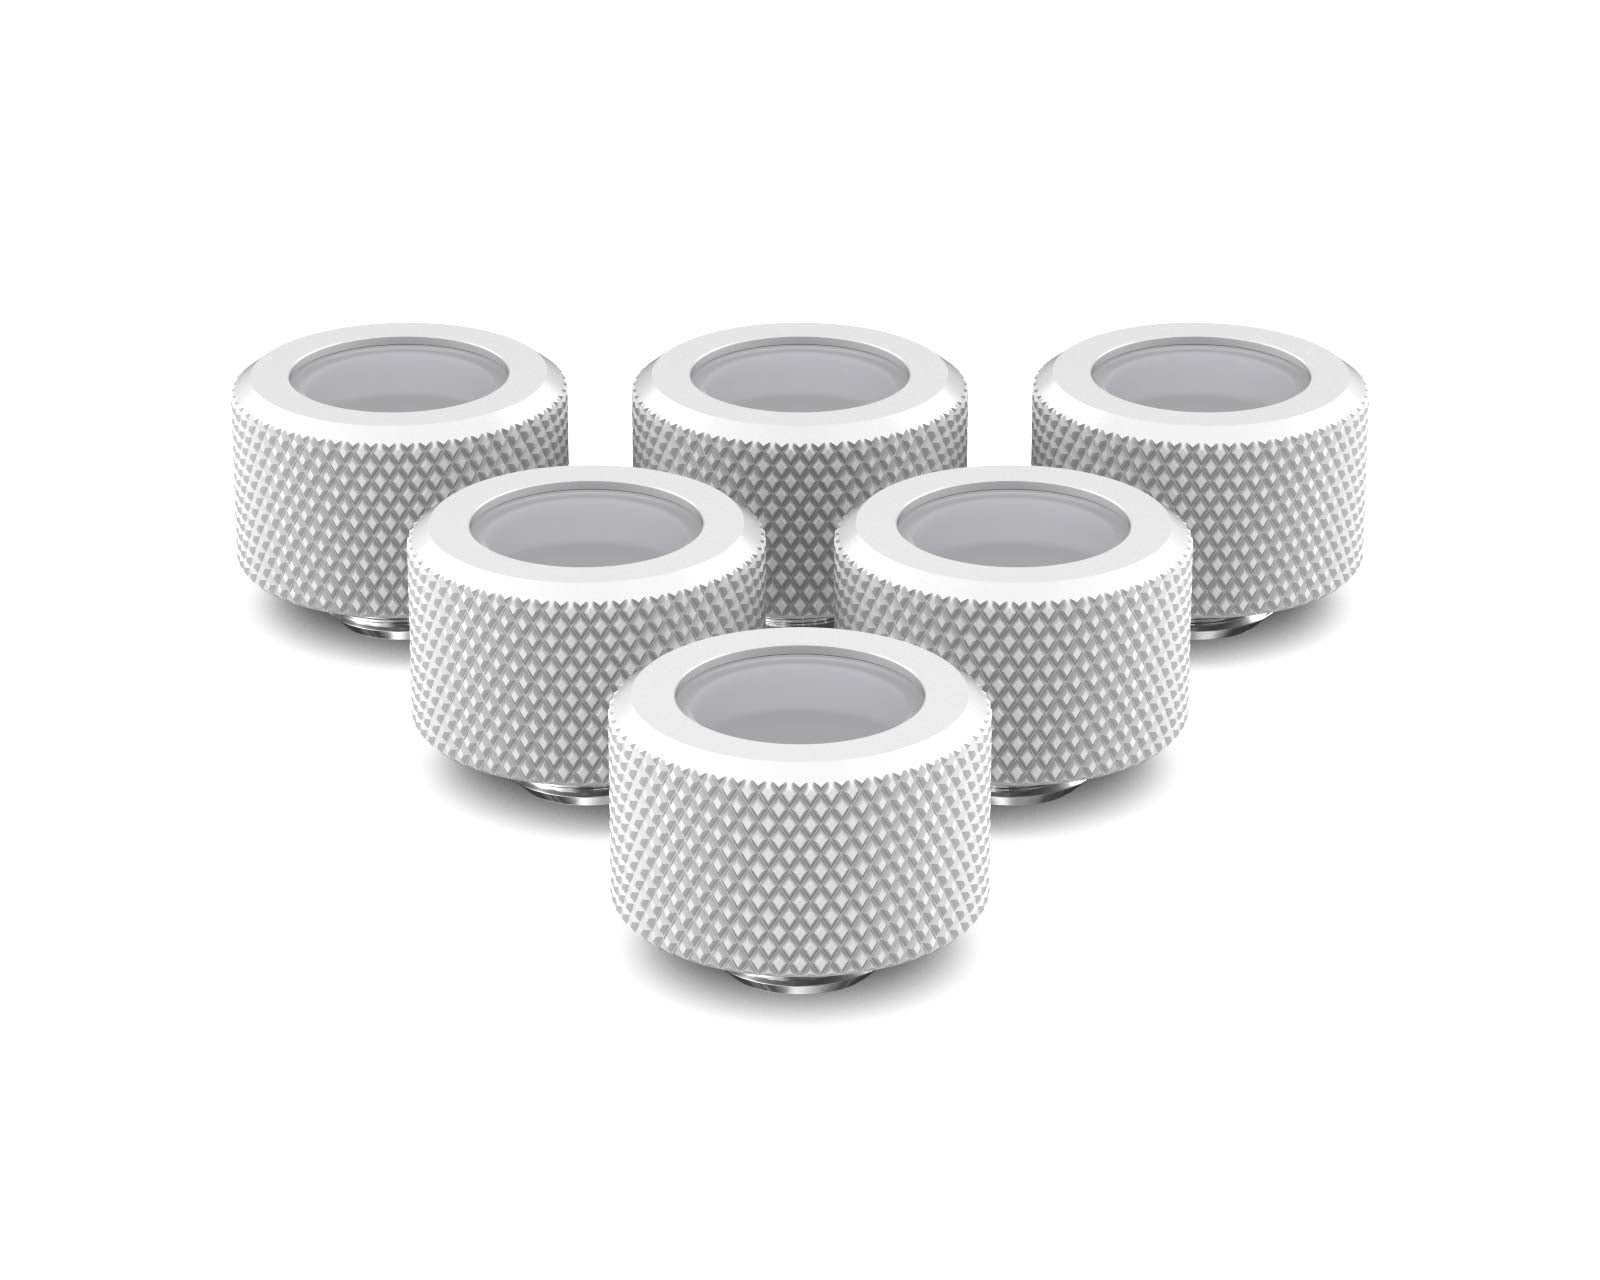 PrimoChill 16mm OD Rigid SX Fitting - 6 Pack - PrimoChill - KEEPING IT COOL Sky White